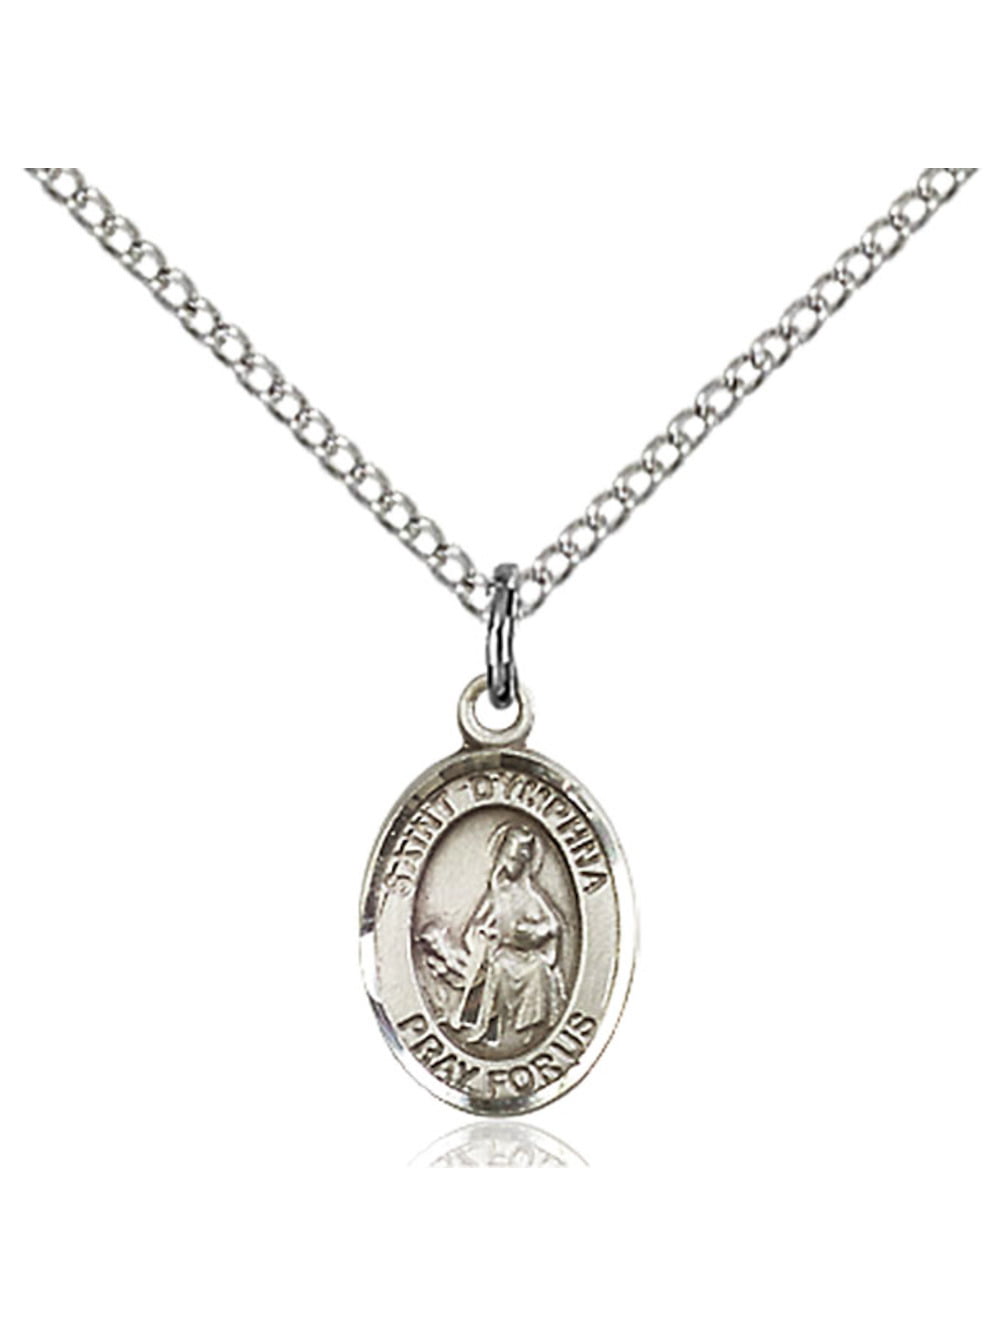 Dymphna Hand-Crafted Oval Medal Pendant in Sterling Silver Bonyak Jewelry St